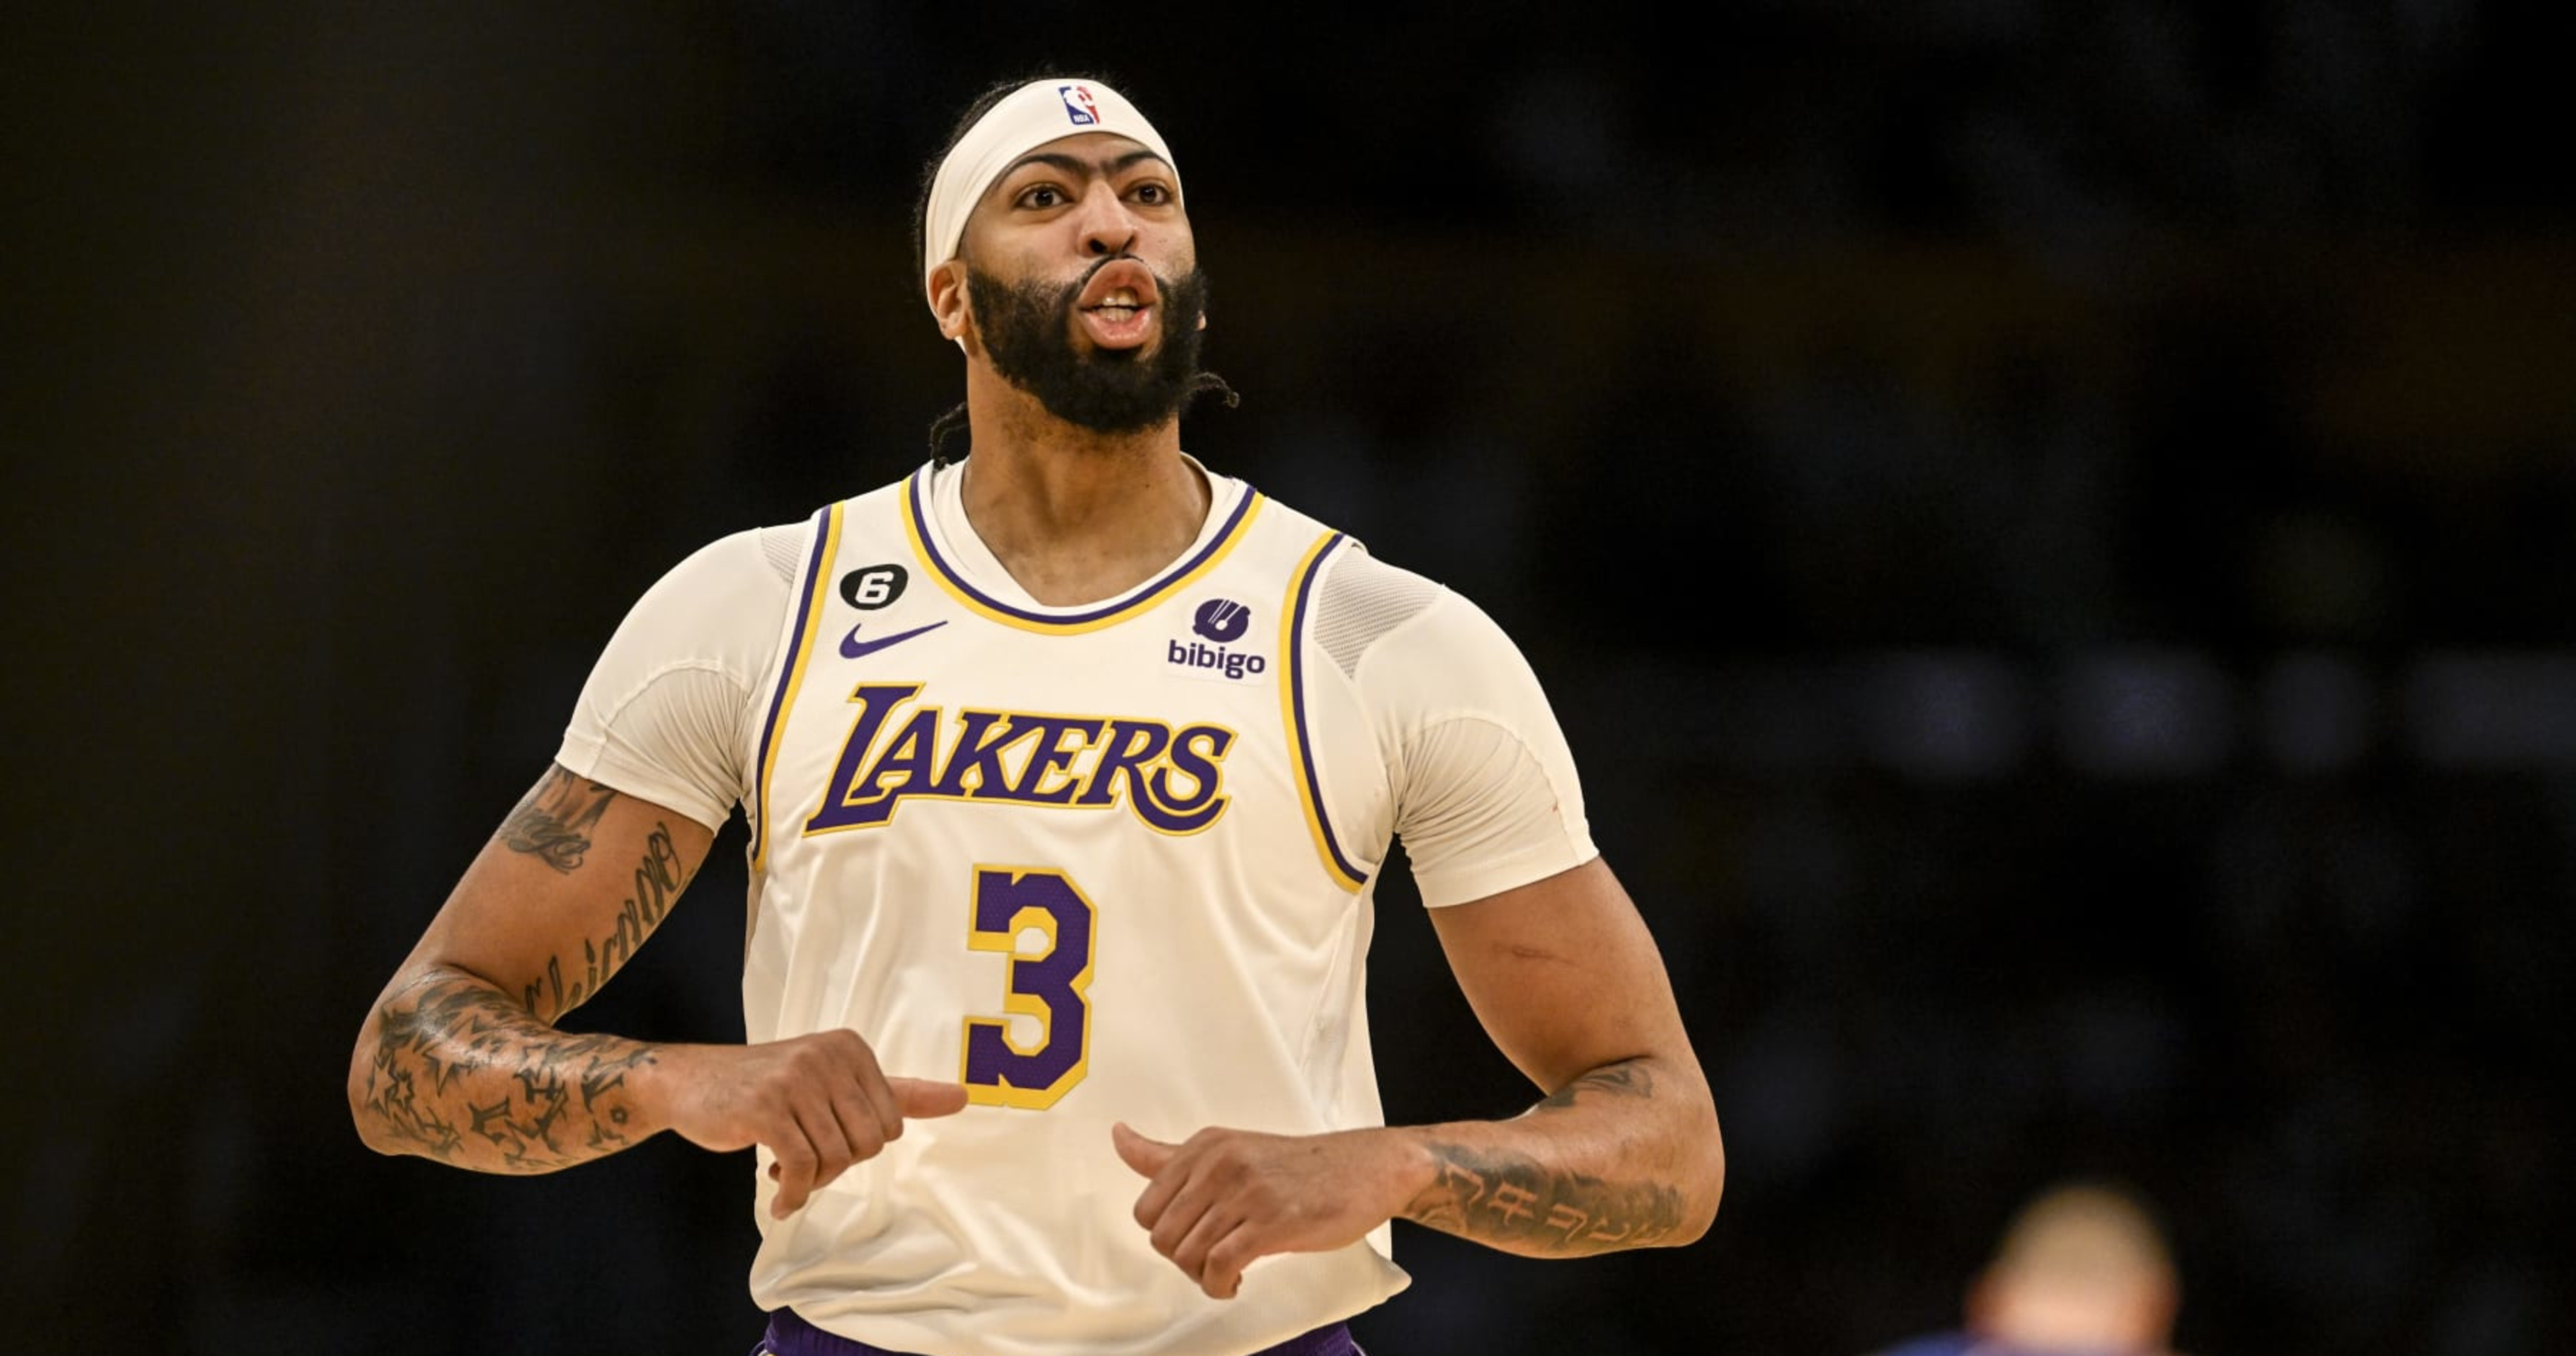 Report: Anthony Davis expected to sign extension before Lakers training camp  - Lakers Daily